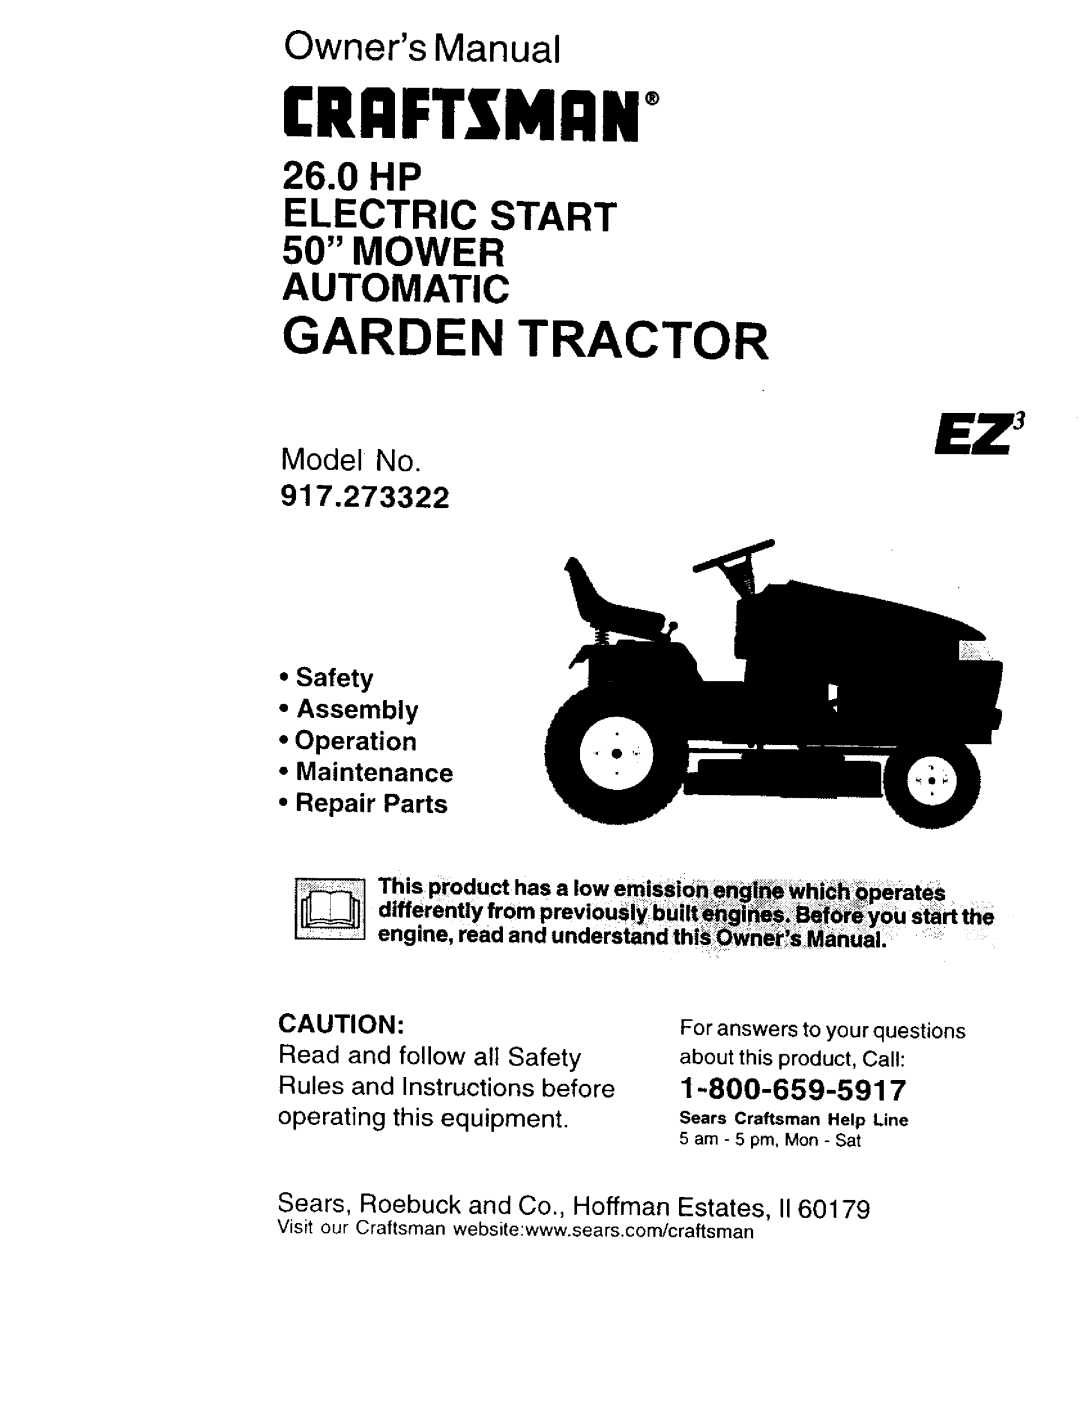 Craftsman 917.273322 owner manual £Raftzmiin+, Owners Manual, ELECTRIC START 50 MOWER, 260HP, Automatic, 1-800-659-5917 